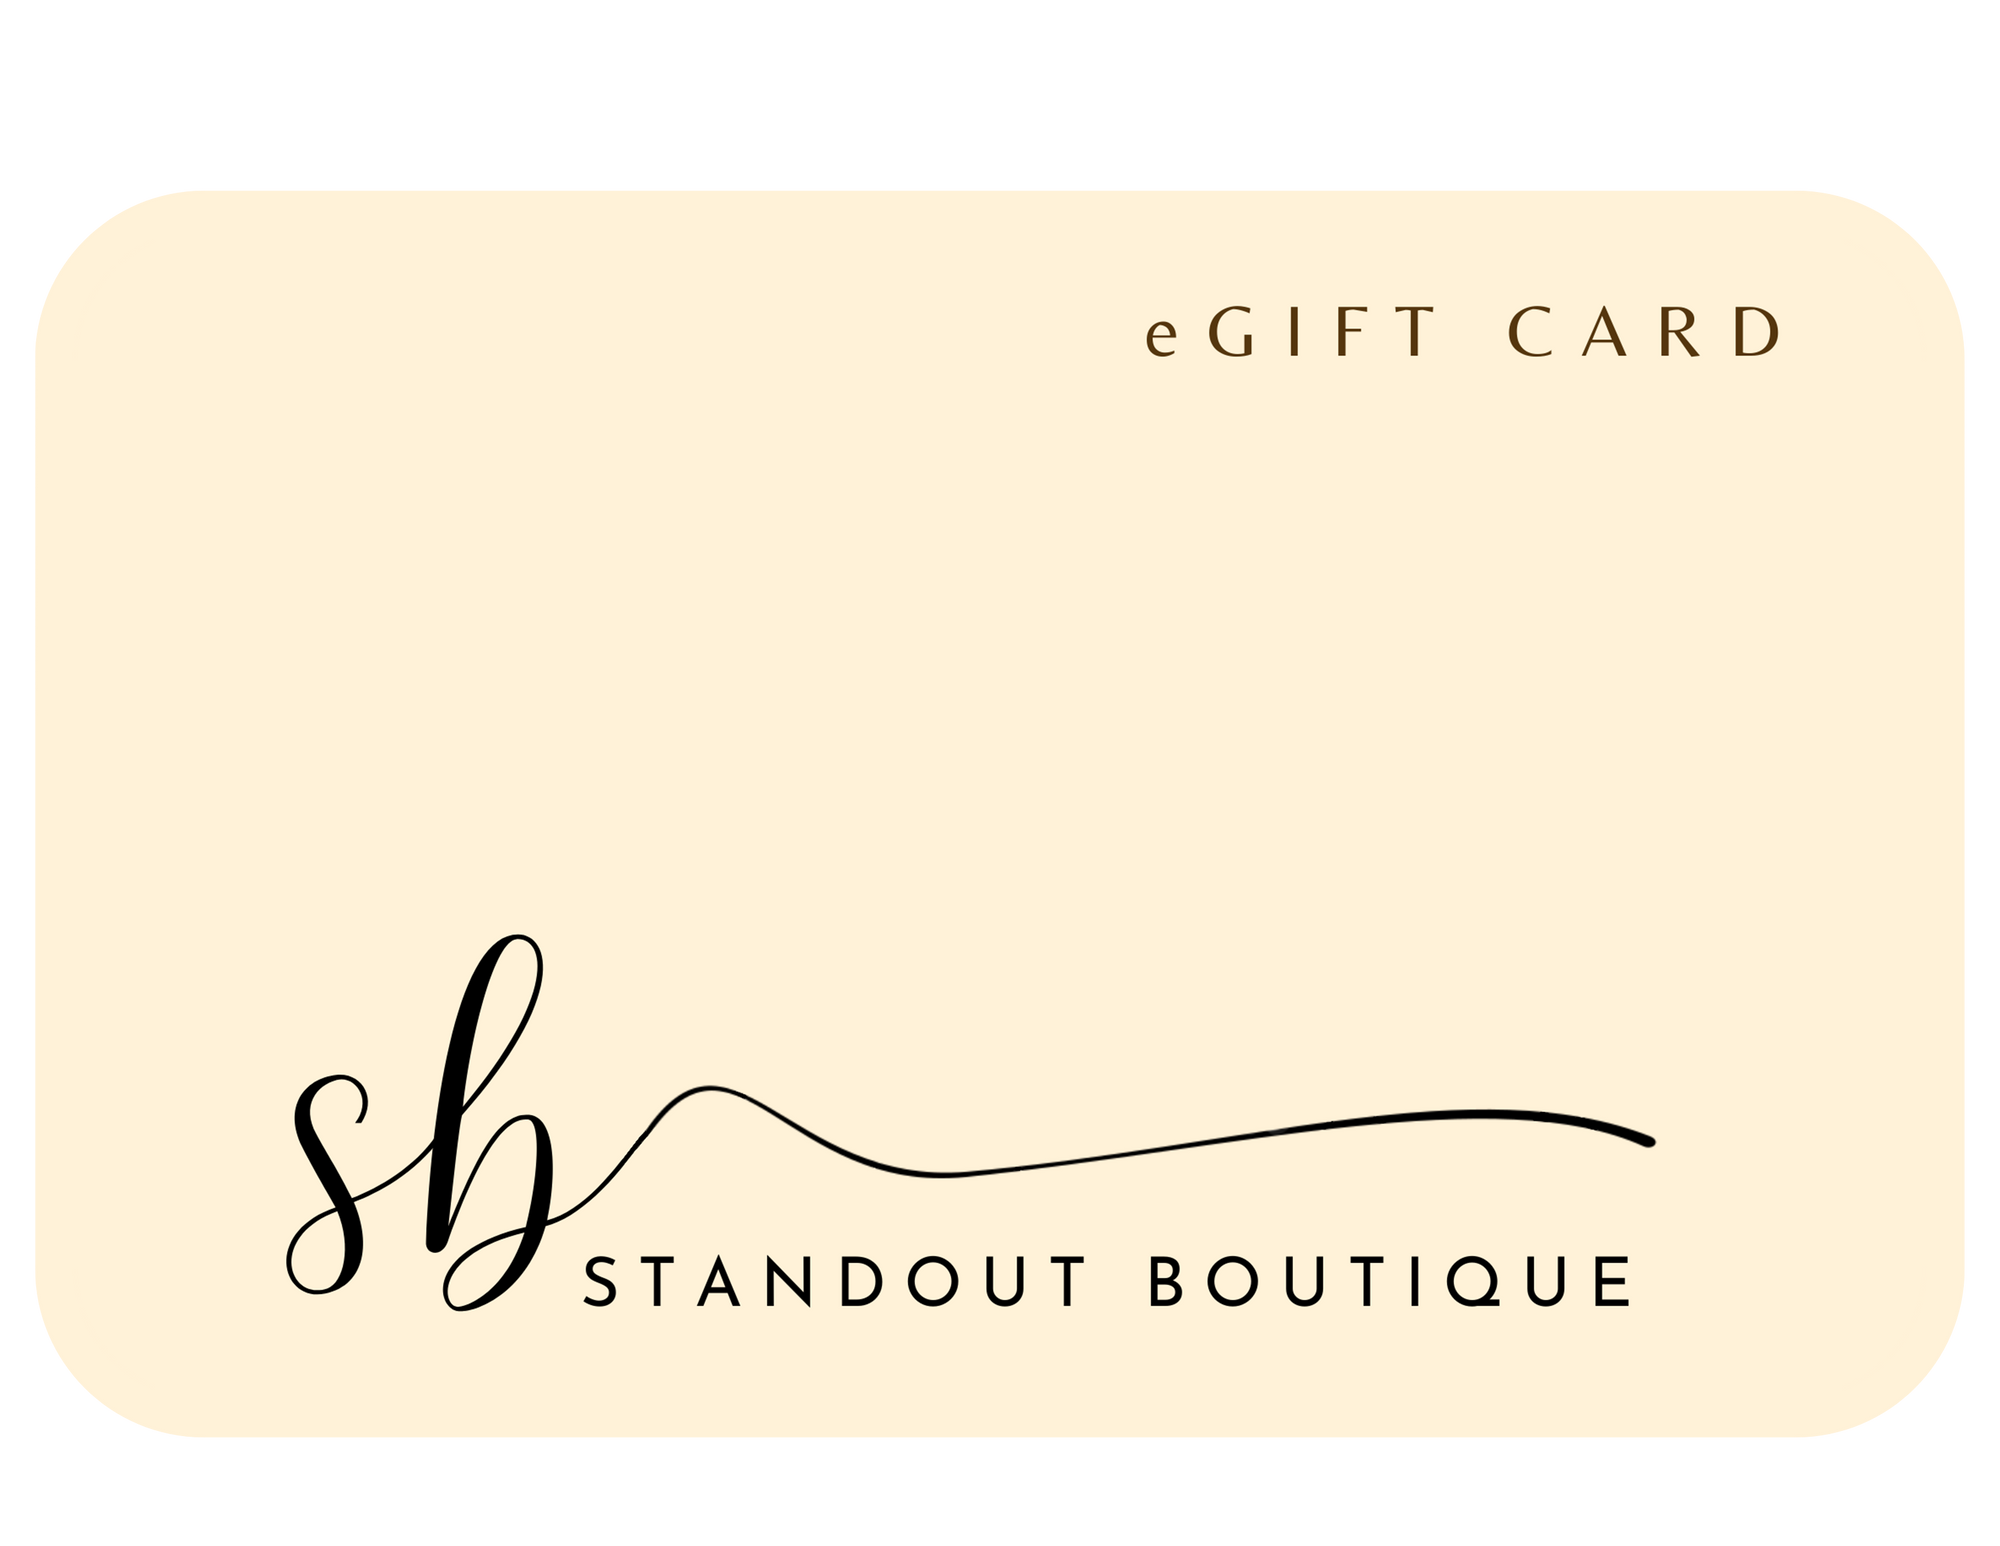 Gift Card - Standout Boutique